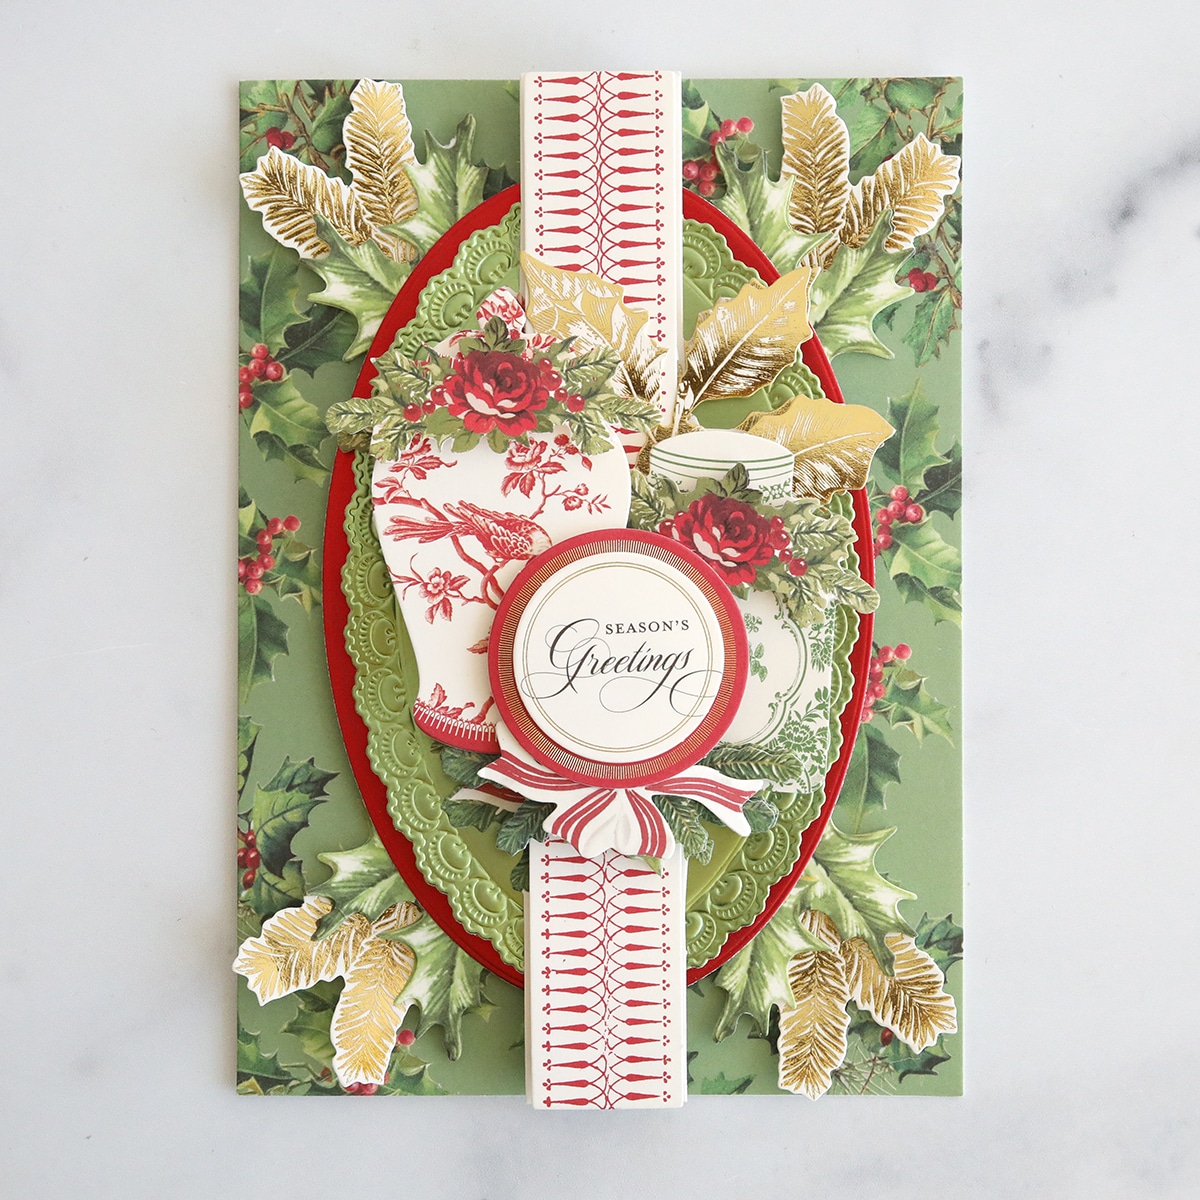 A christmas card with holly leaves and berries.